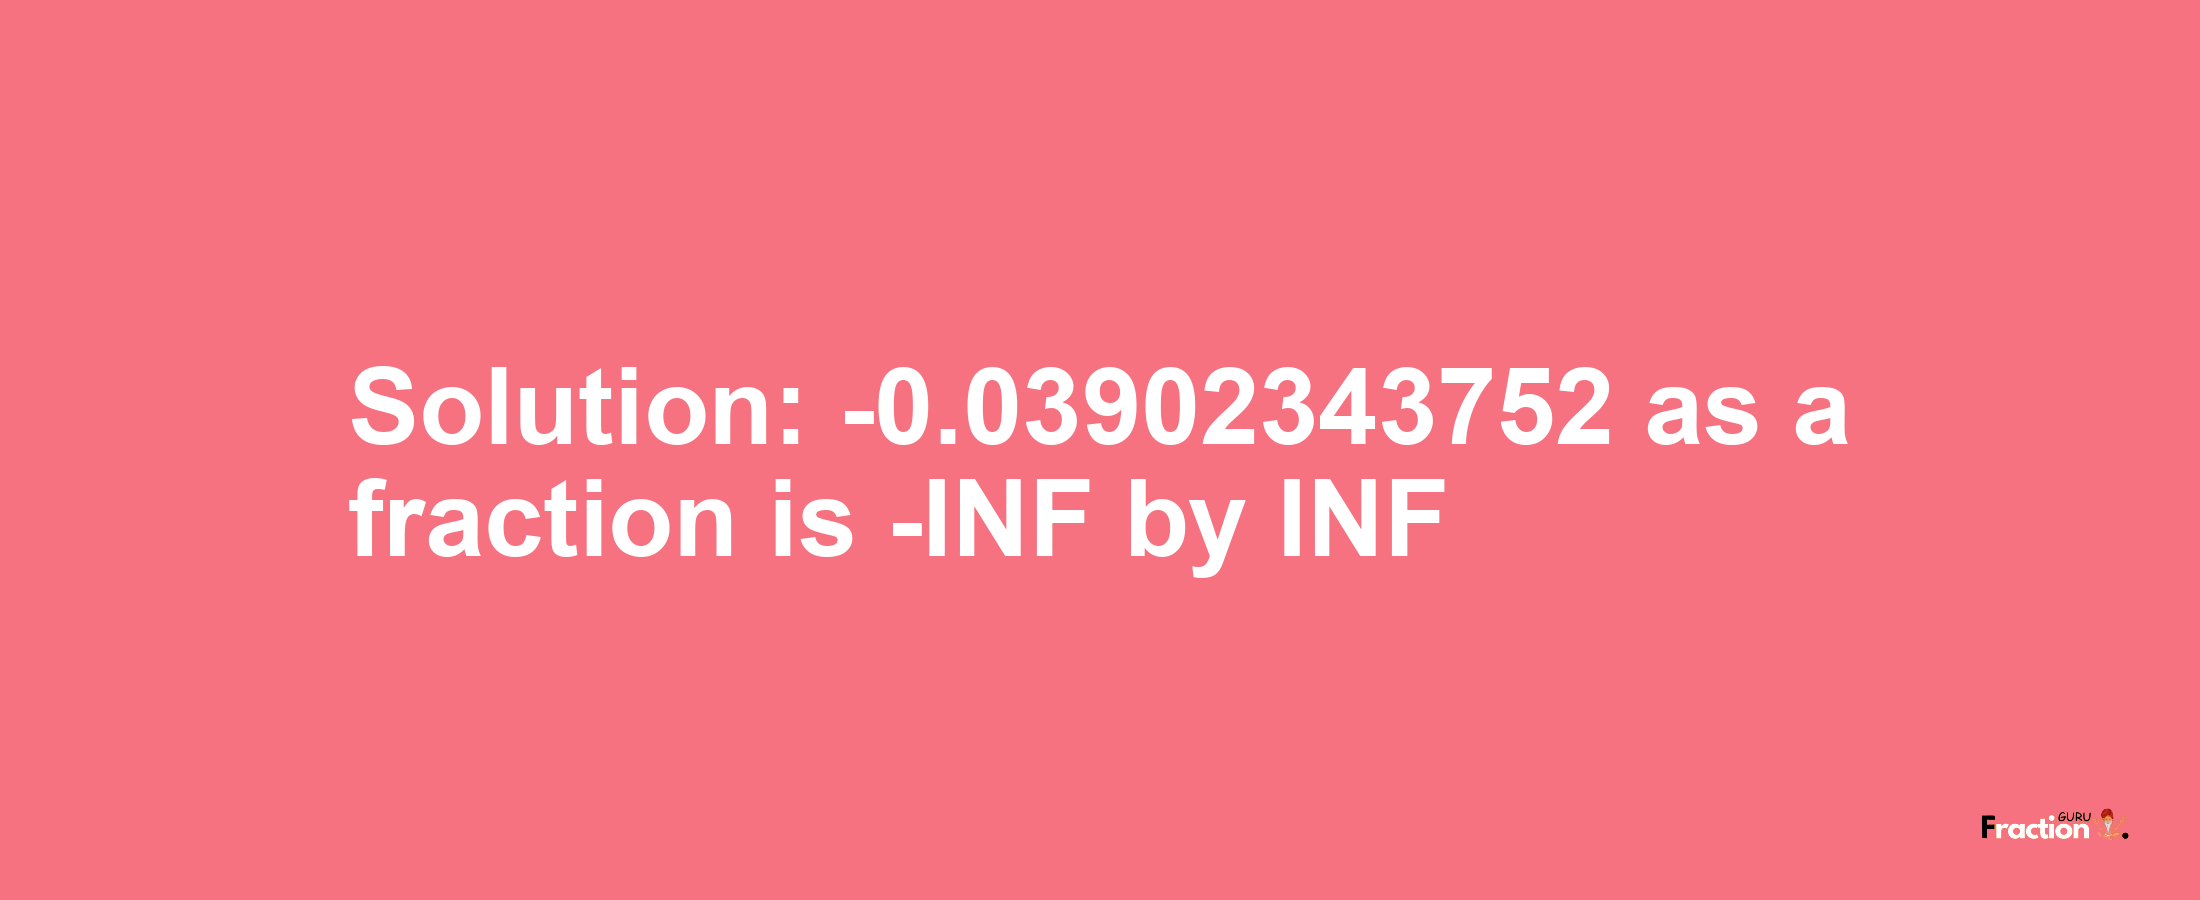 Solution:-0.03902343752 as a fraction is -INF/INF